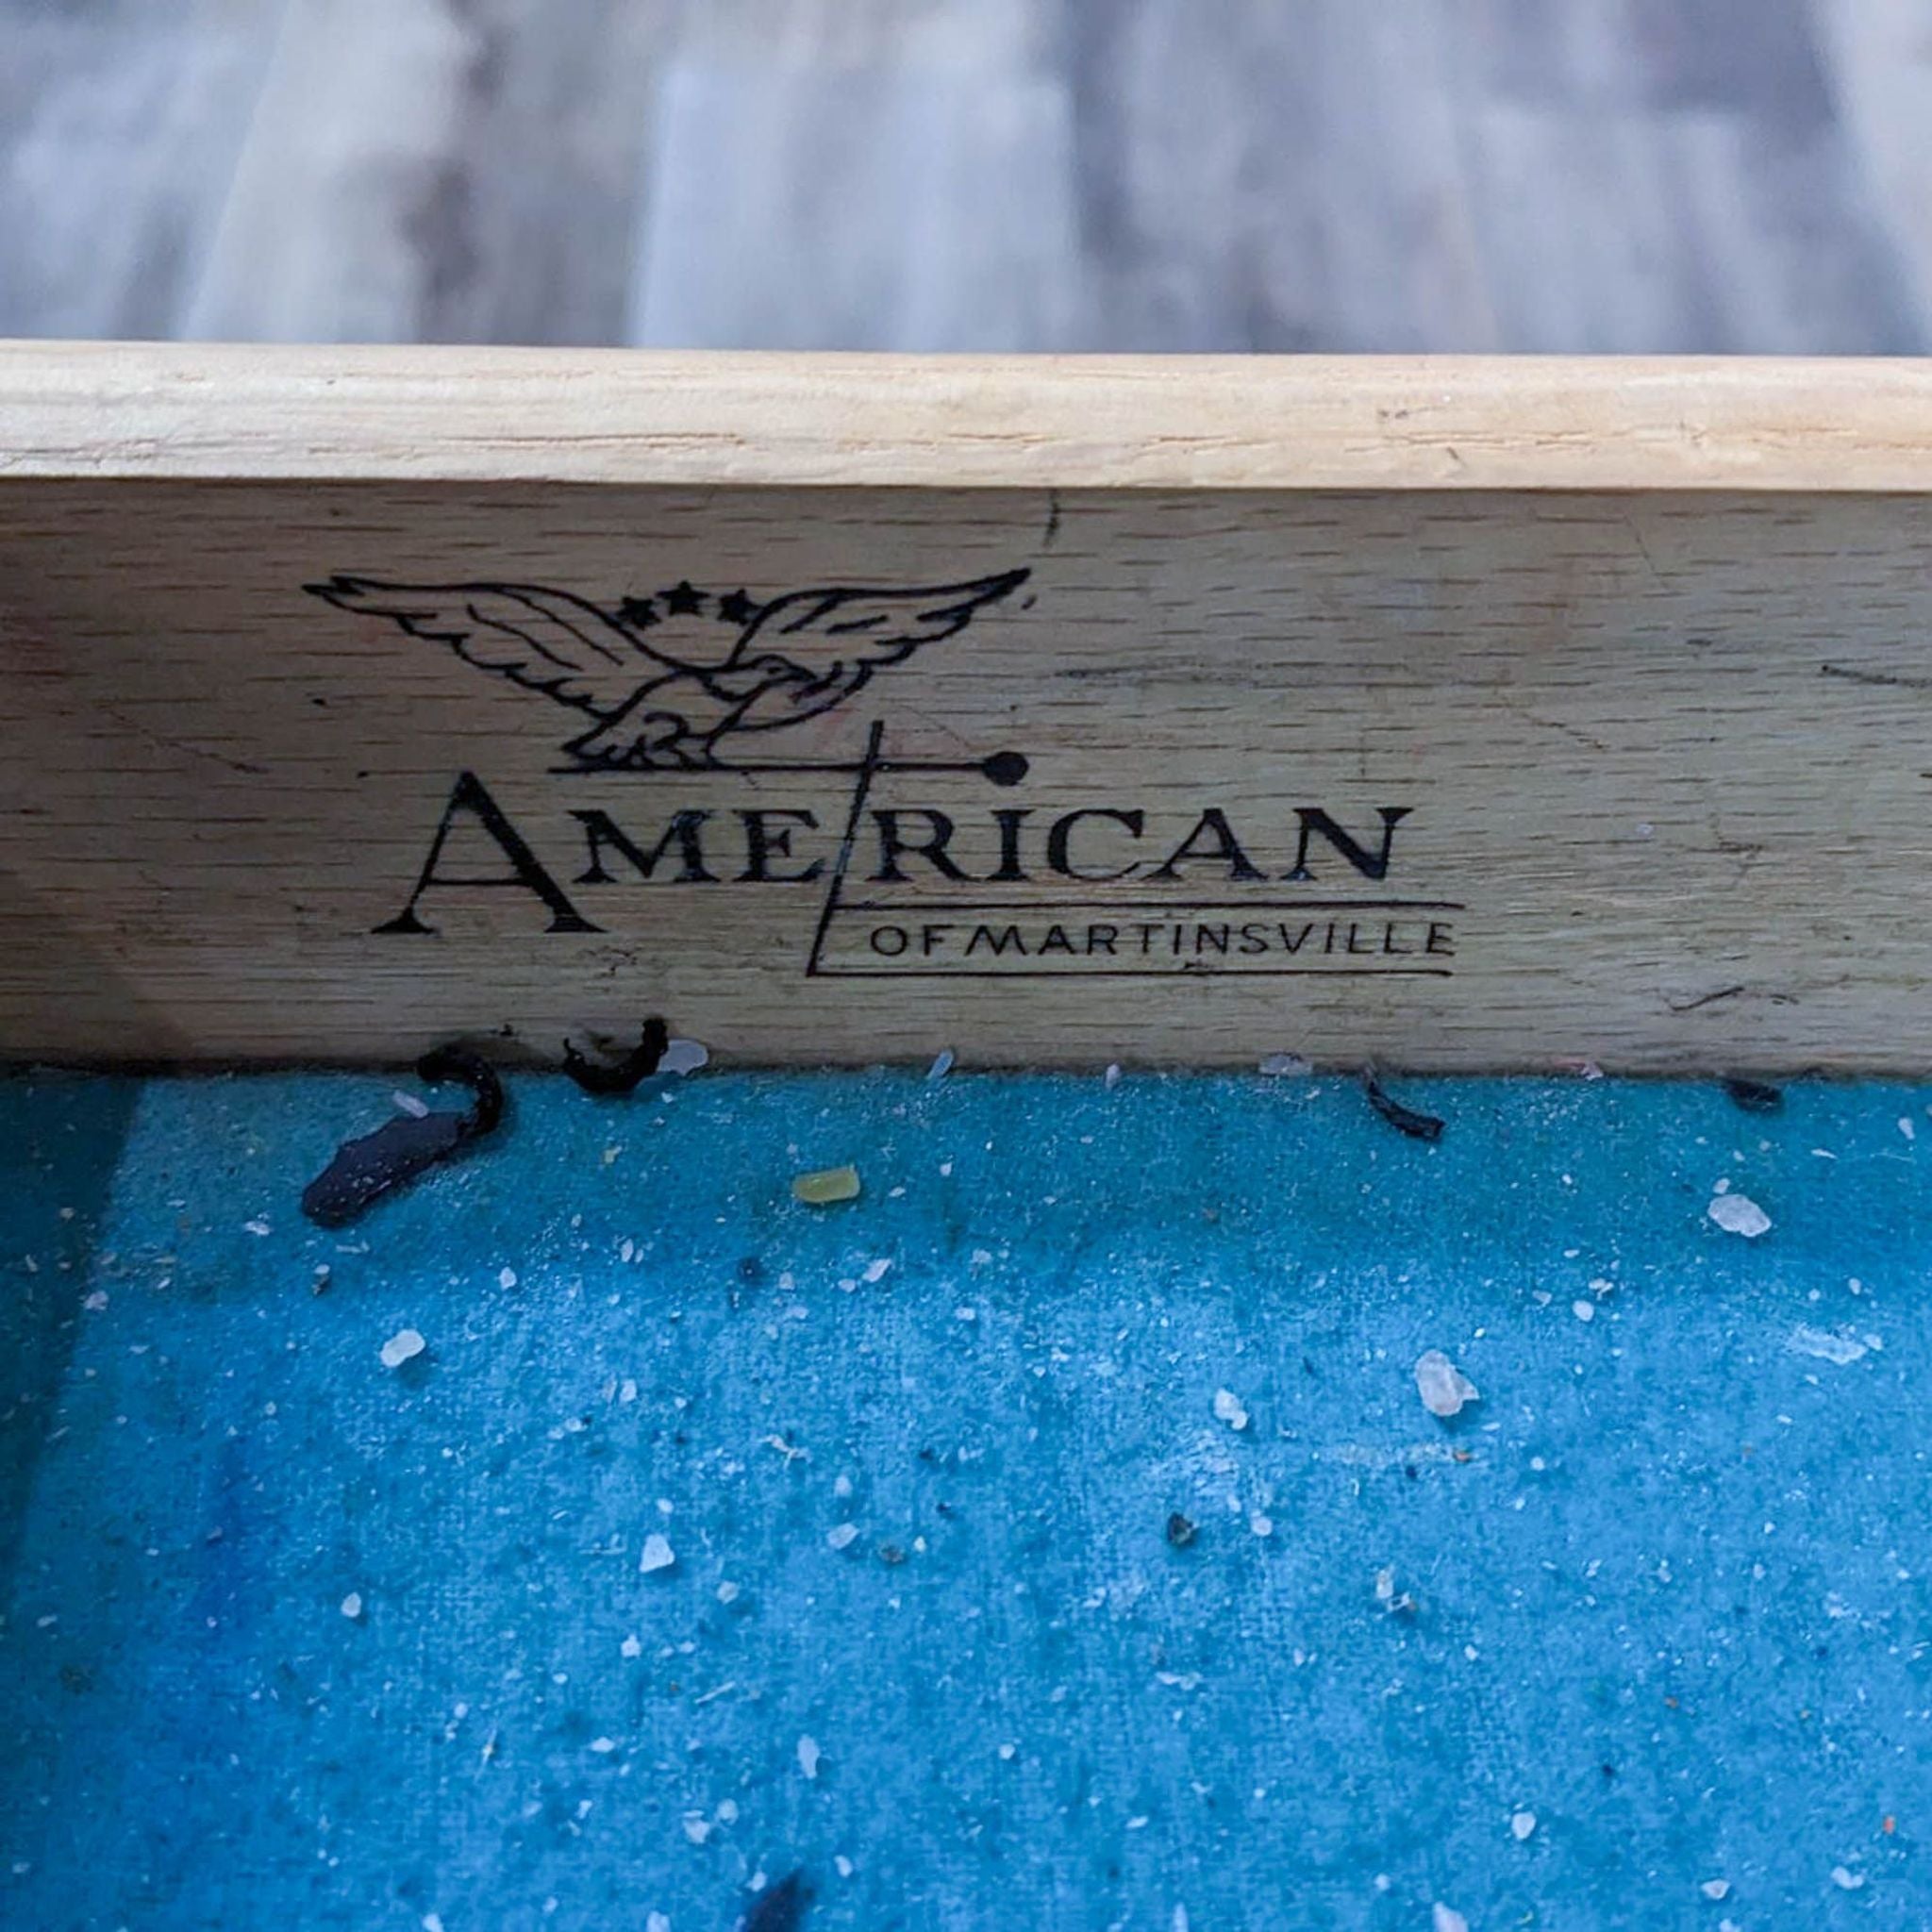 Close-up of the American of Martinsville logo on a wooden surface.